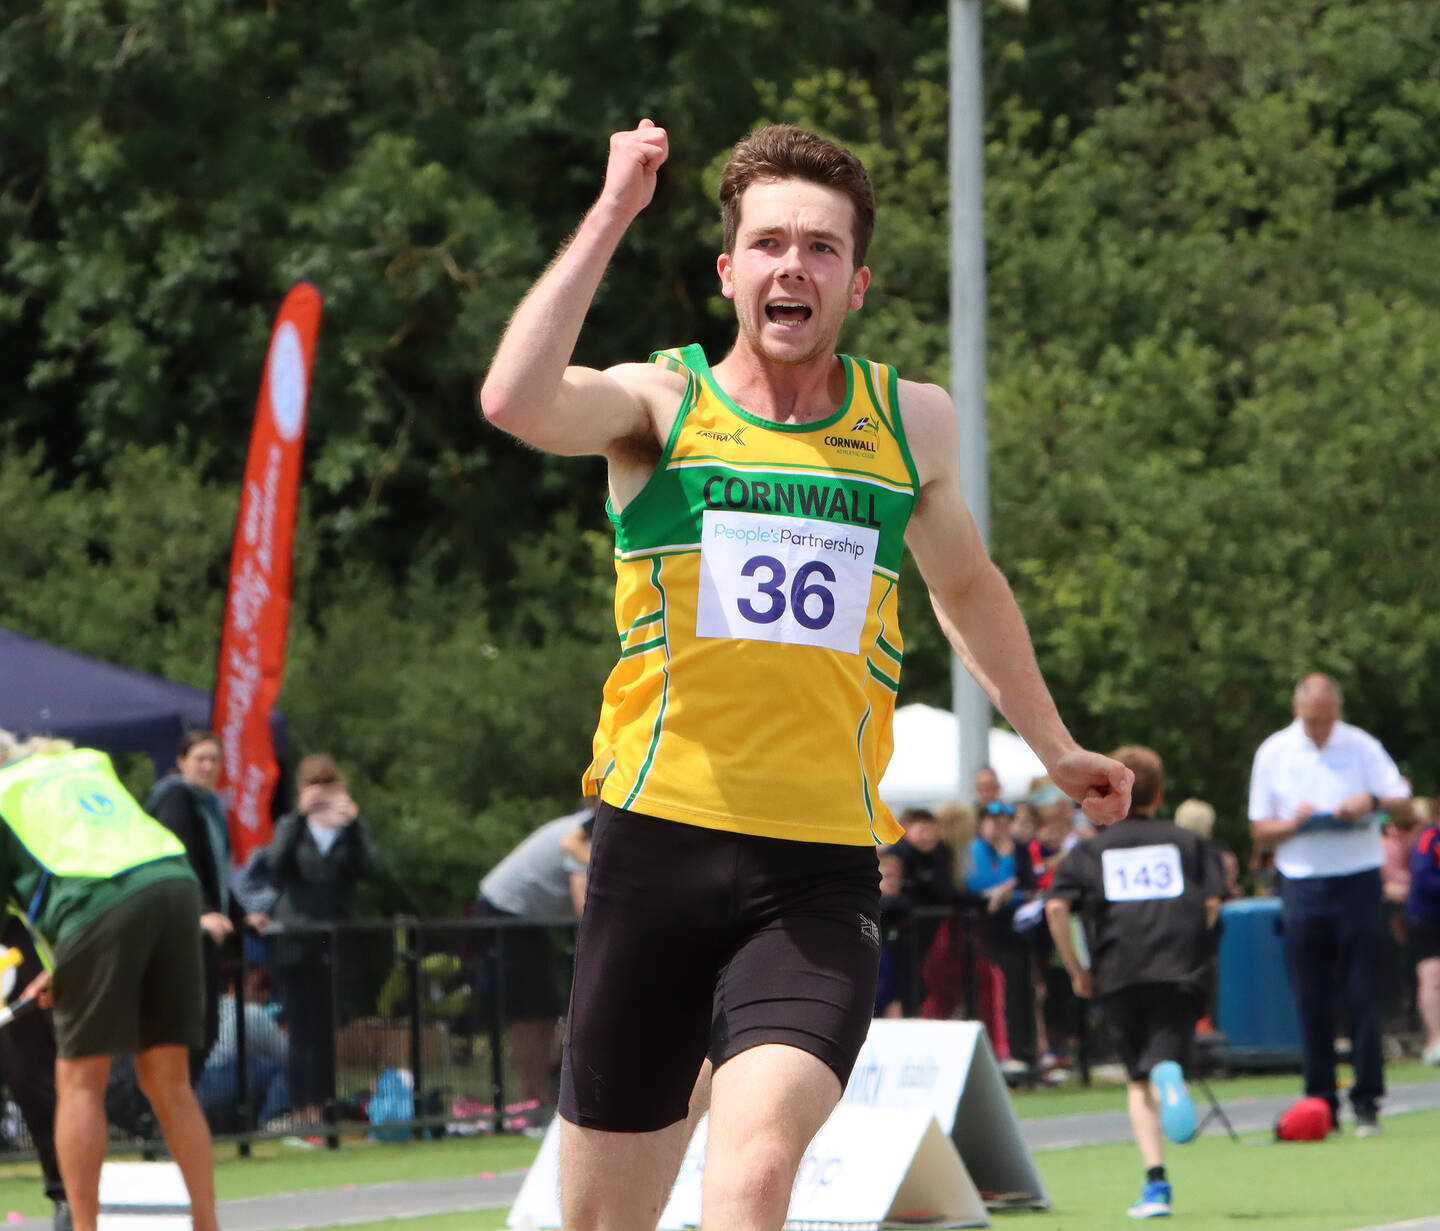 A sprinter in a yellow and green vest celebrates as they run.